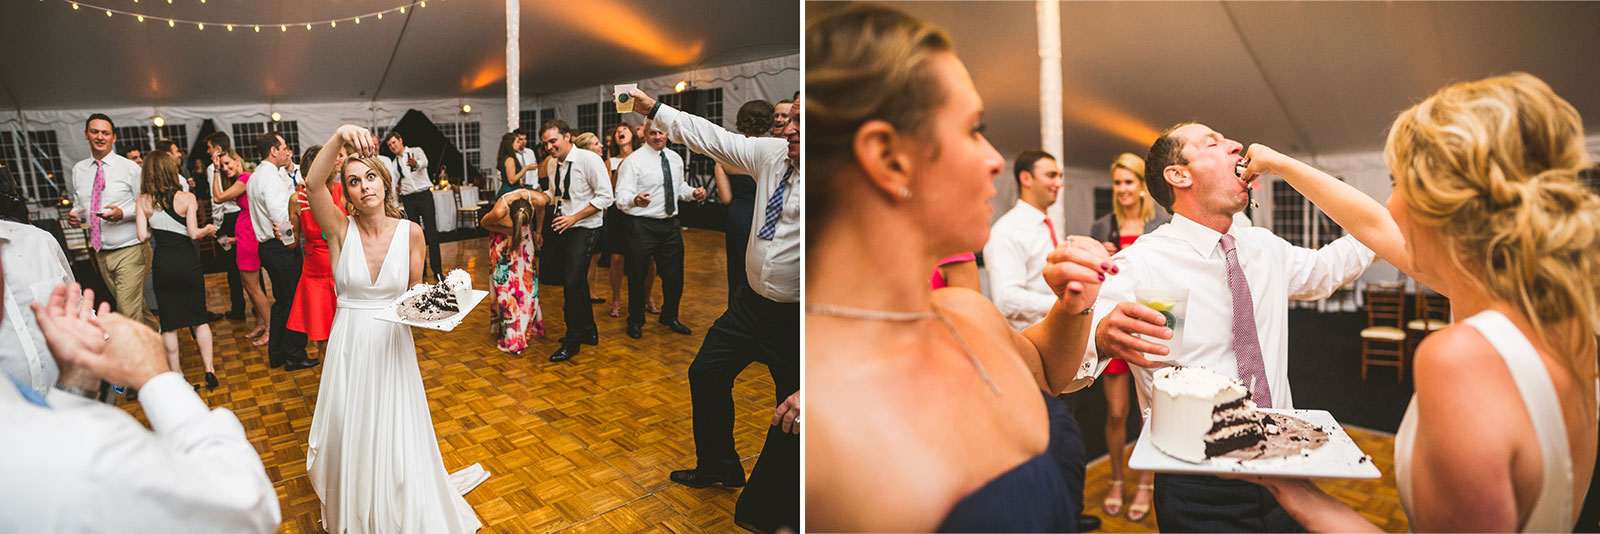 104 fun bride at reception photography - Stephanie + Zack // Conway Farms Chicago Wedding Photographers